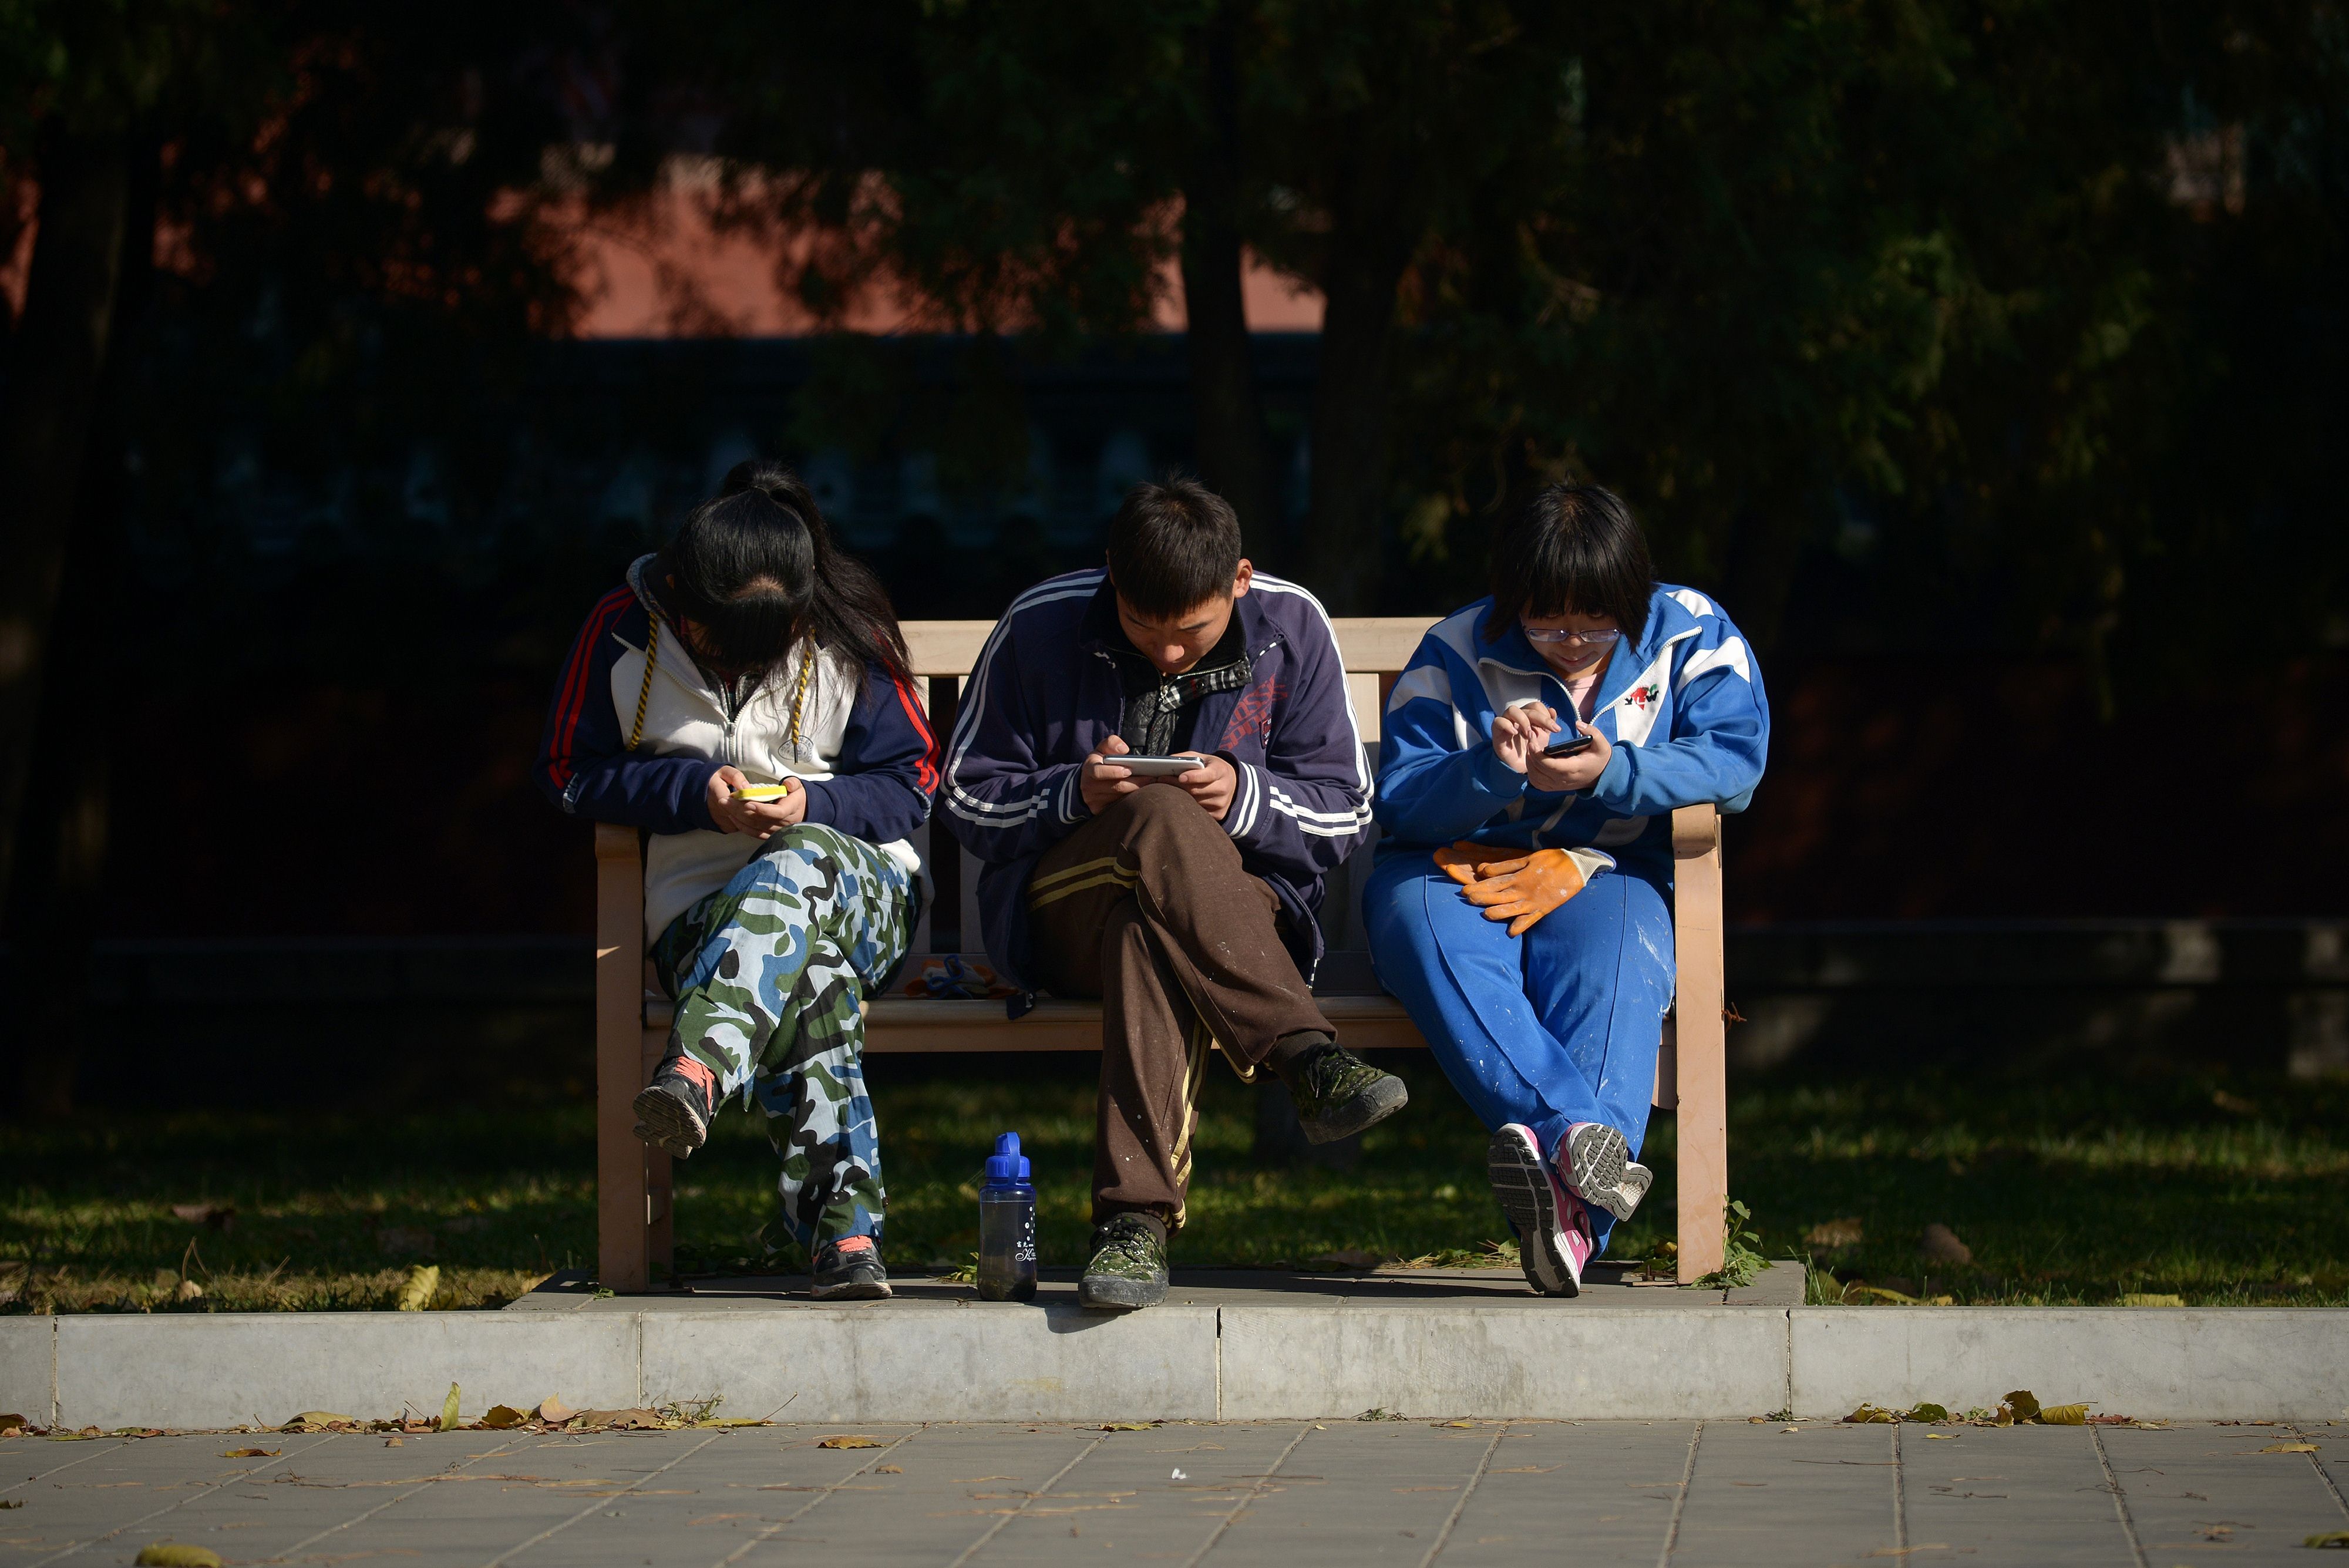 China's thirst for smartphones seems to be cooling, according to some new research. Photo: AFP